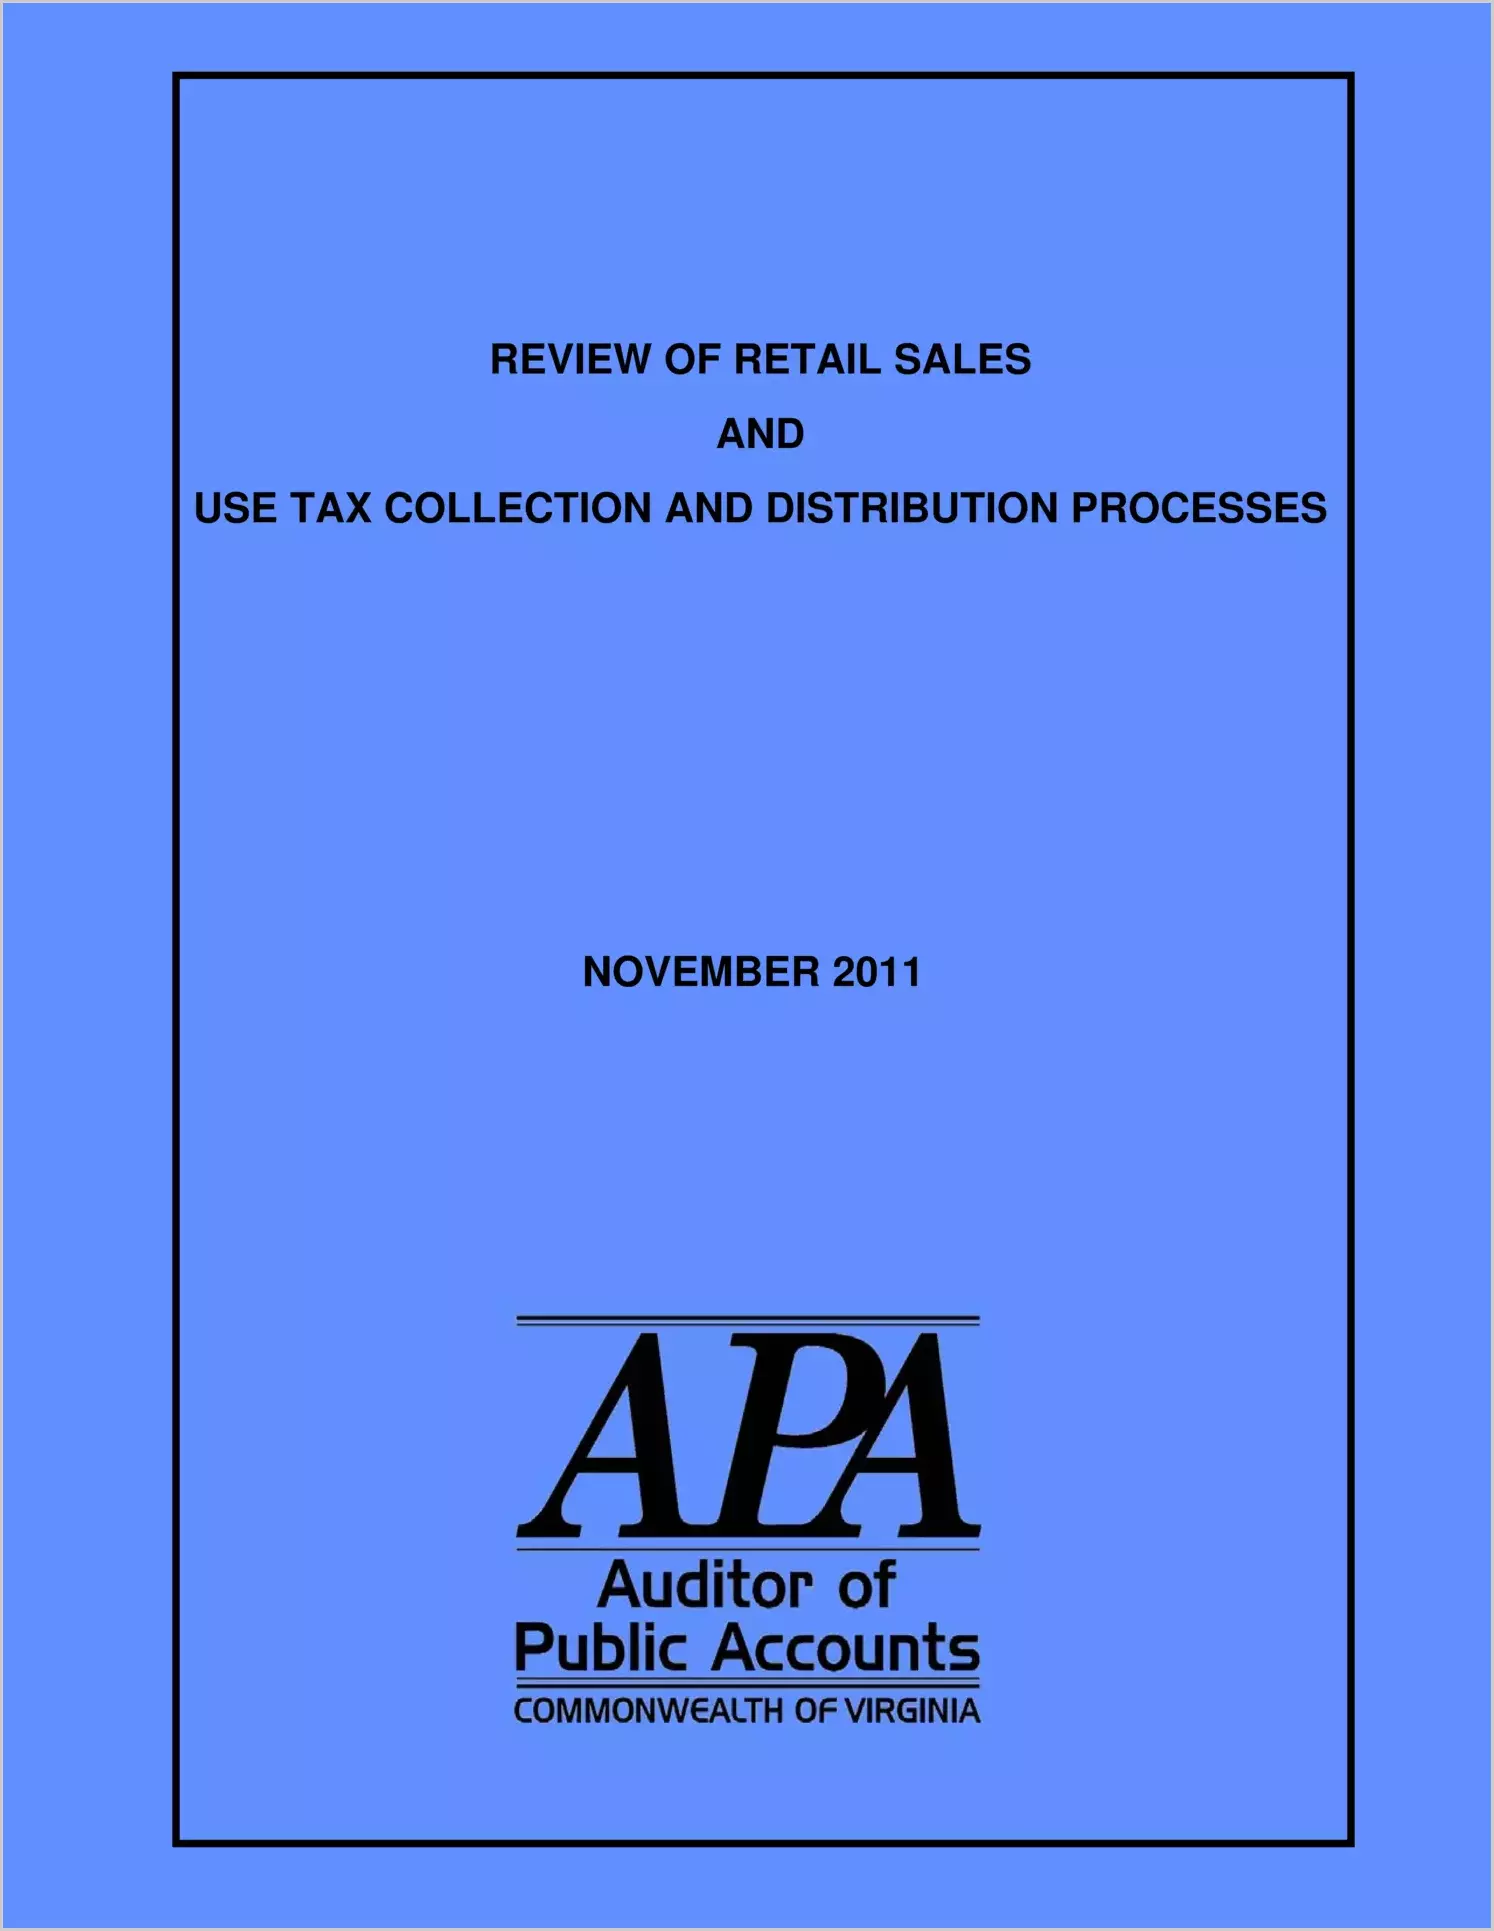 Review of Retail Sales and Use Tax Collection and Distribution Processes as of November 2011